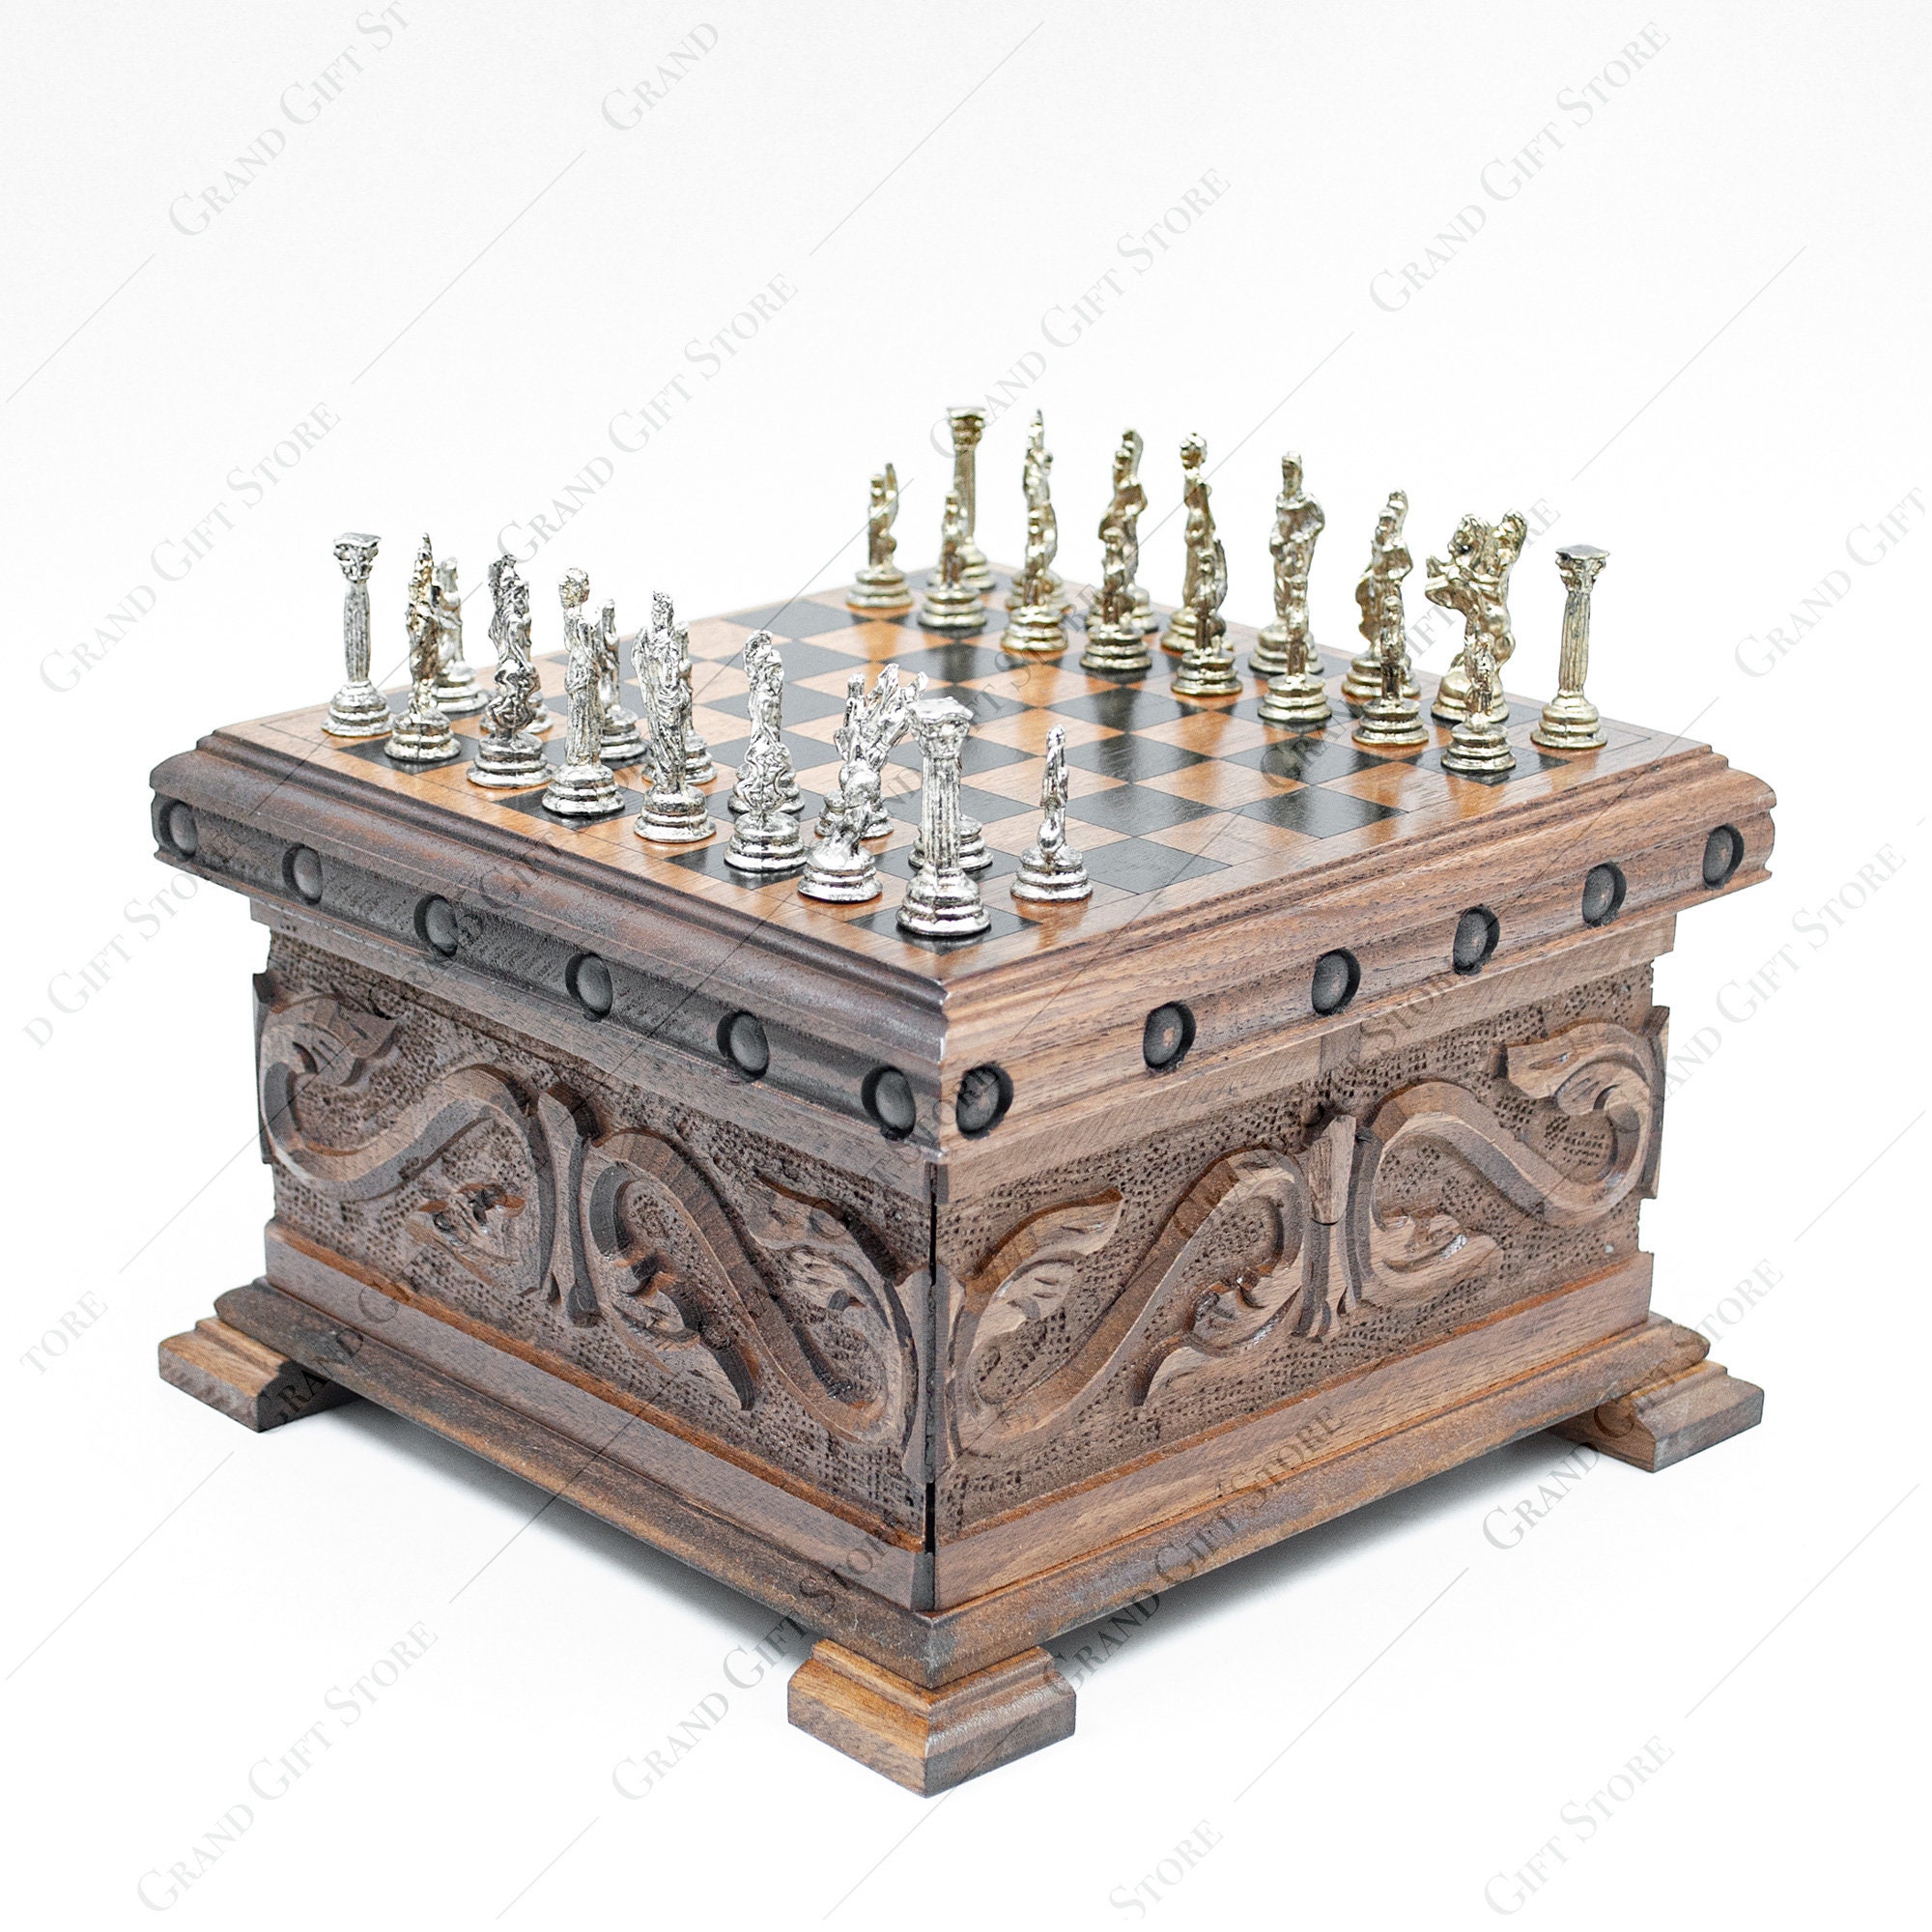 Grand English Style Chess Set with Storage Drawers – Pieces are